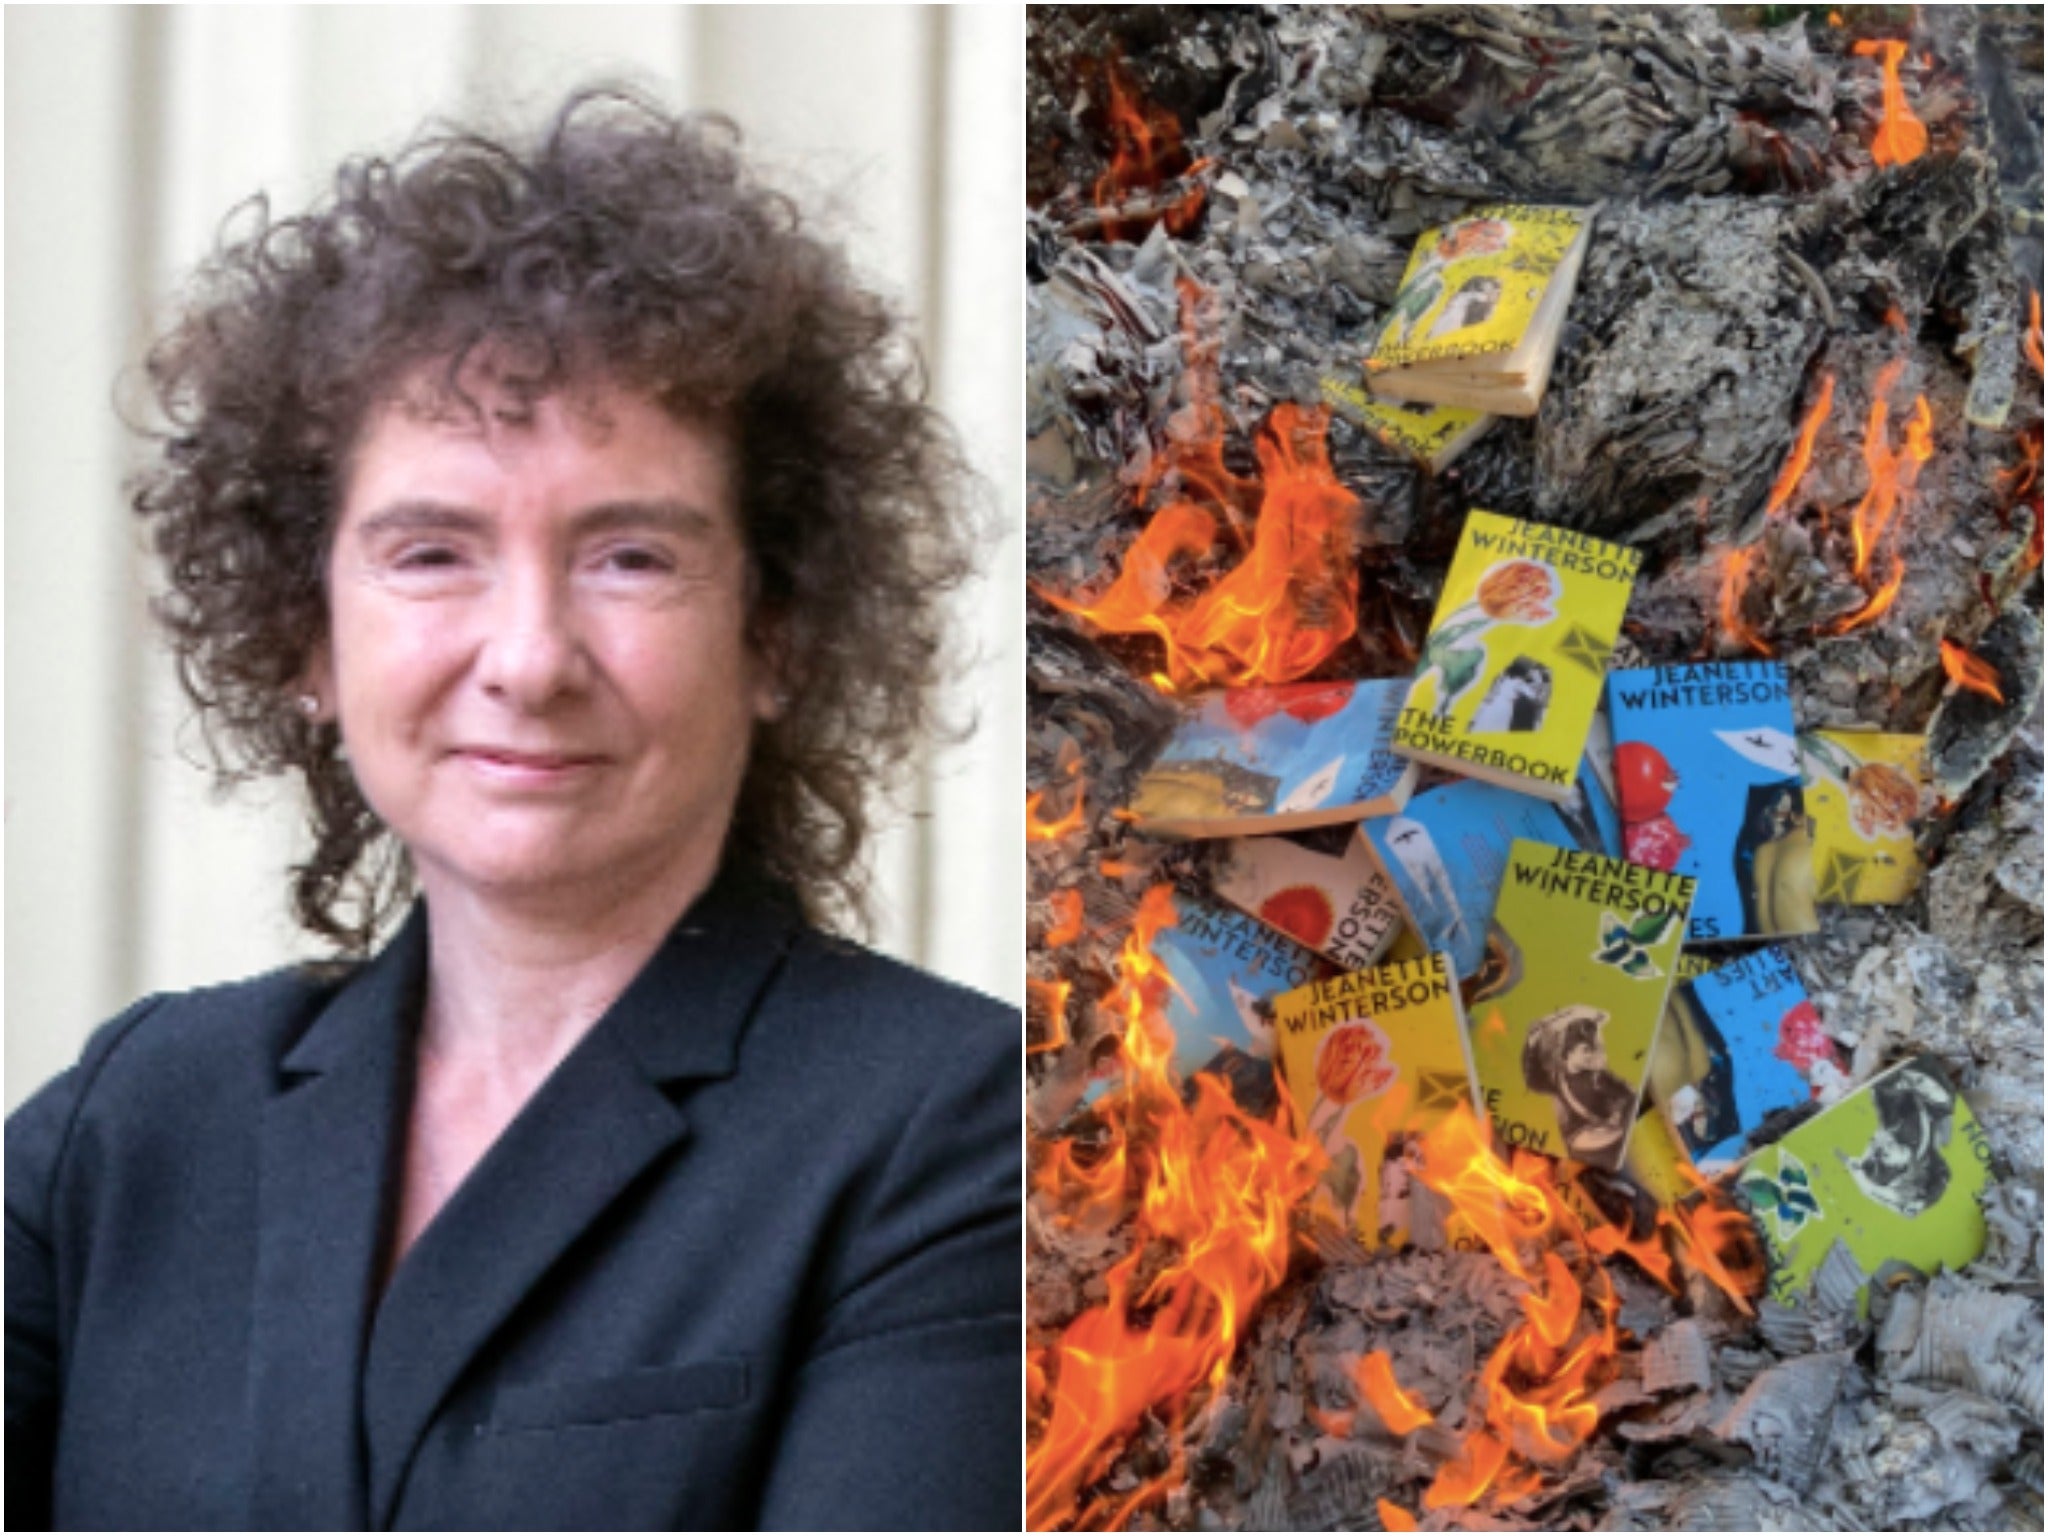 Author Jeanette Winterson shared a photo on social media of copies of her books being burned